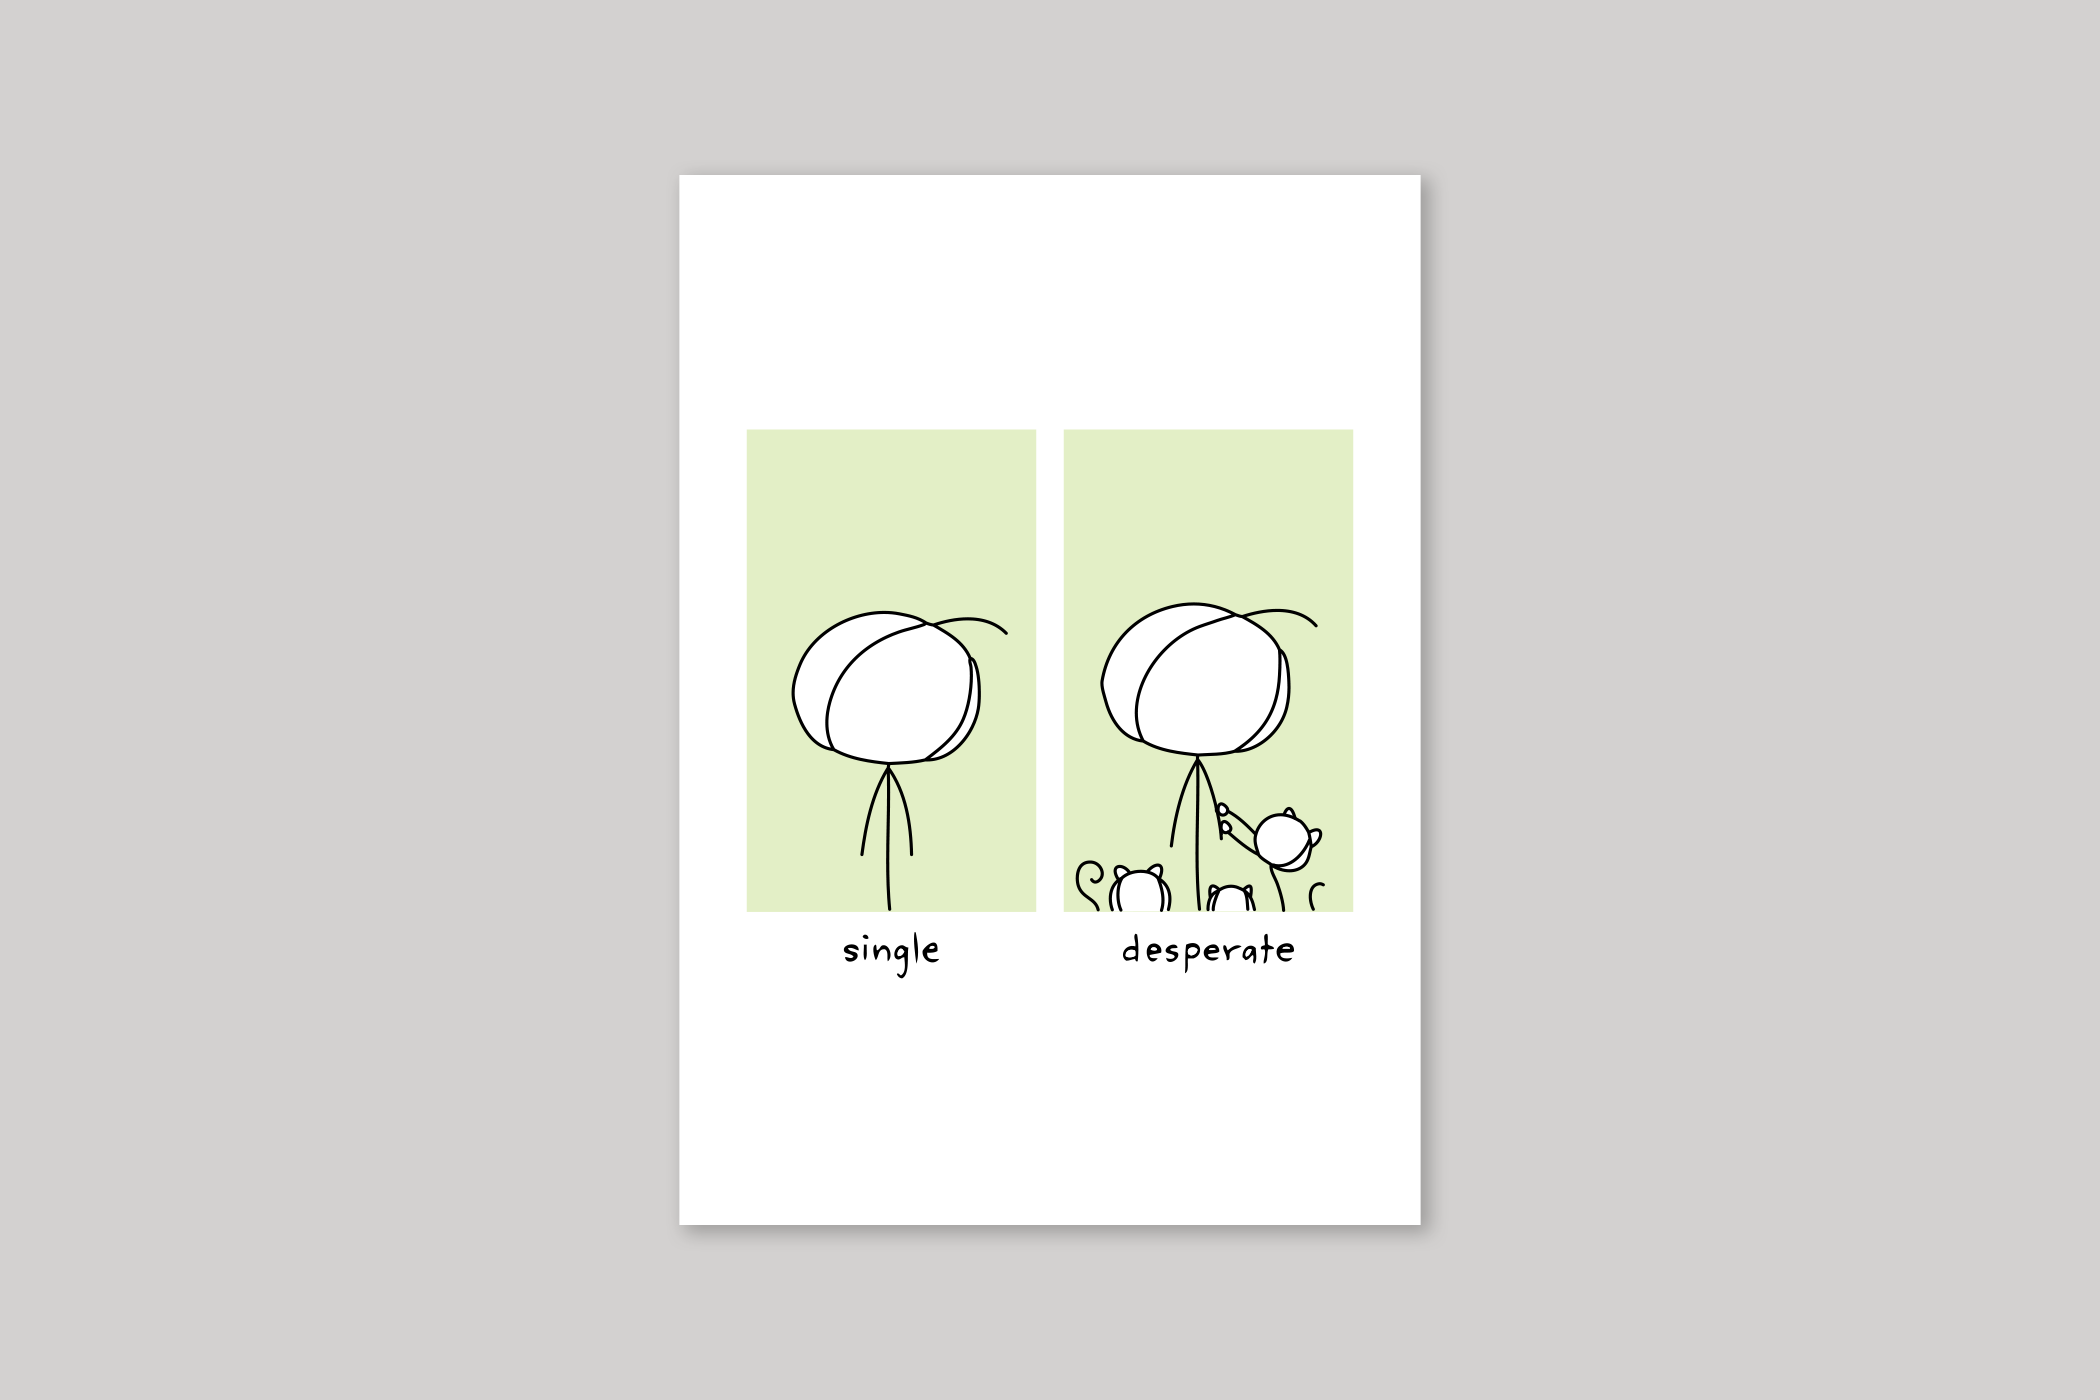 Single/Desperate humorous illustration from Mean Cards range of greeting cards by Icon.